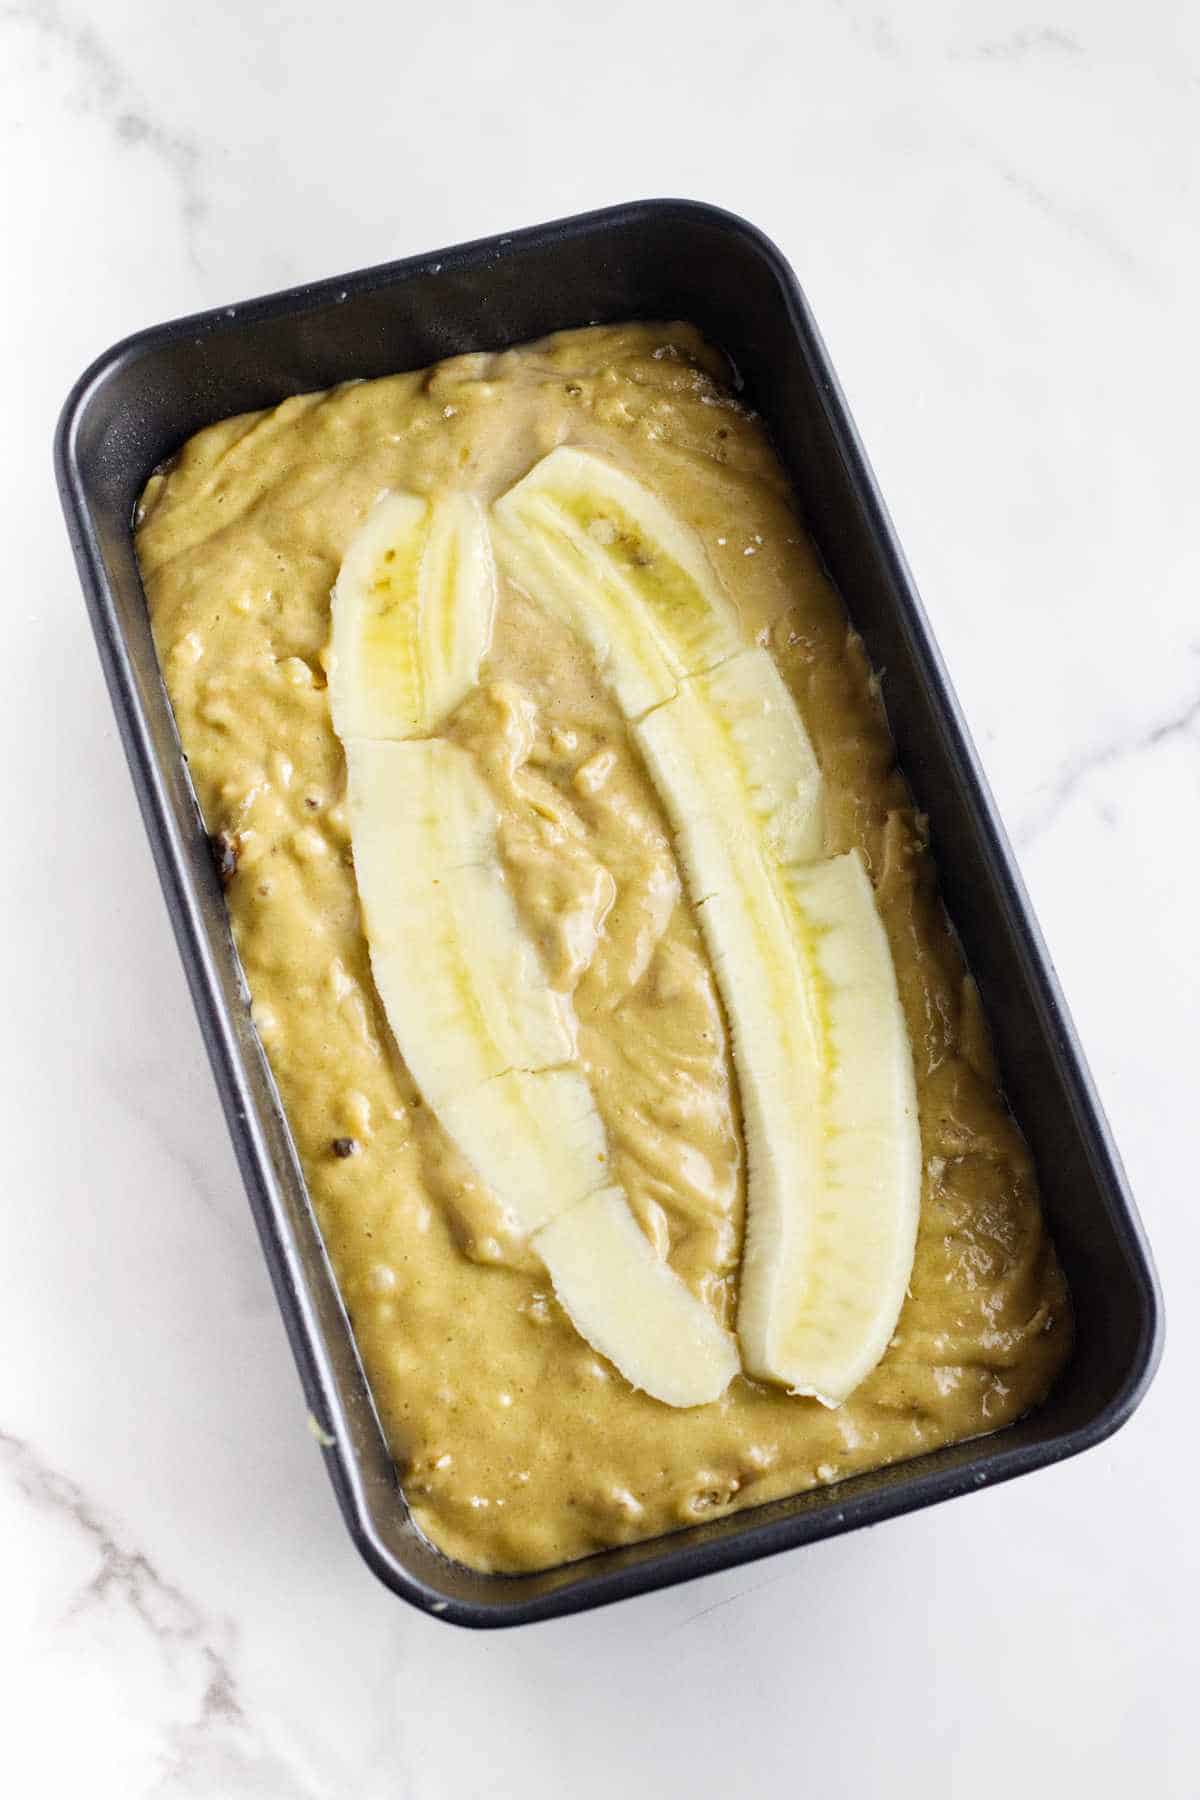 banana bread batter poured into a loaf pan with slices of banana garnishing the top.